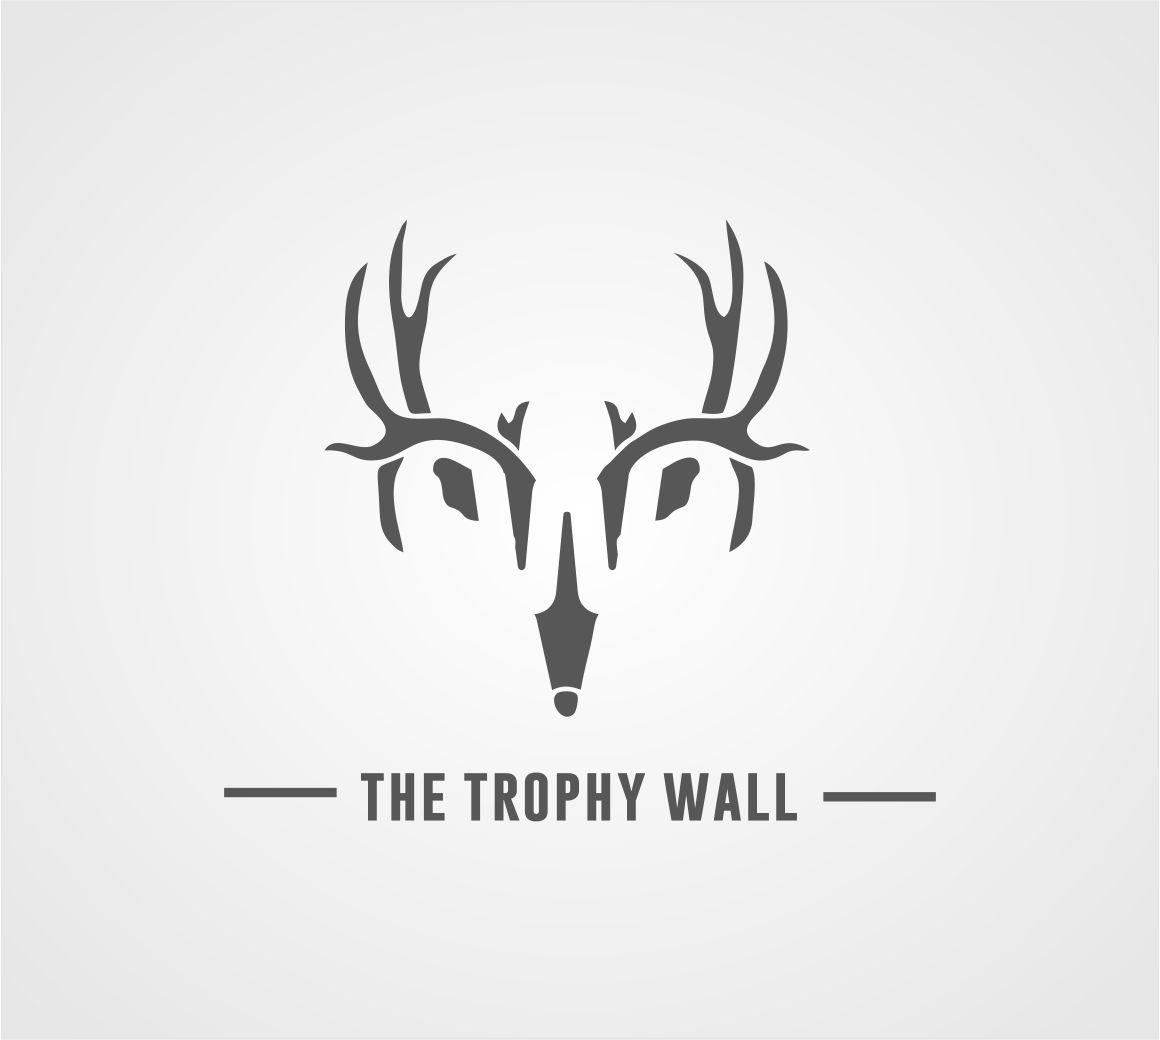 Hunting Company Logo - Masculine, Bold, Hunting Logo Design for The Trophy Wall or TW by ...